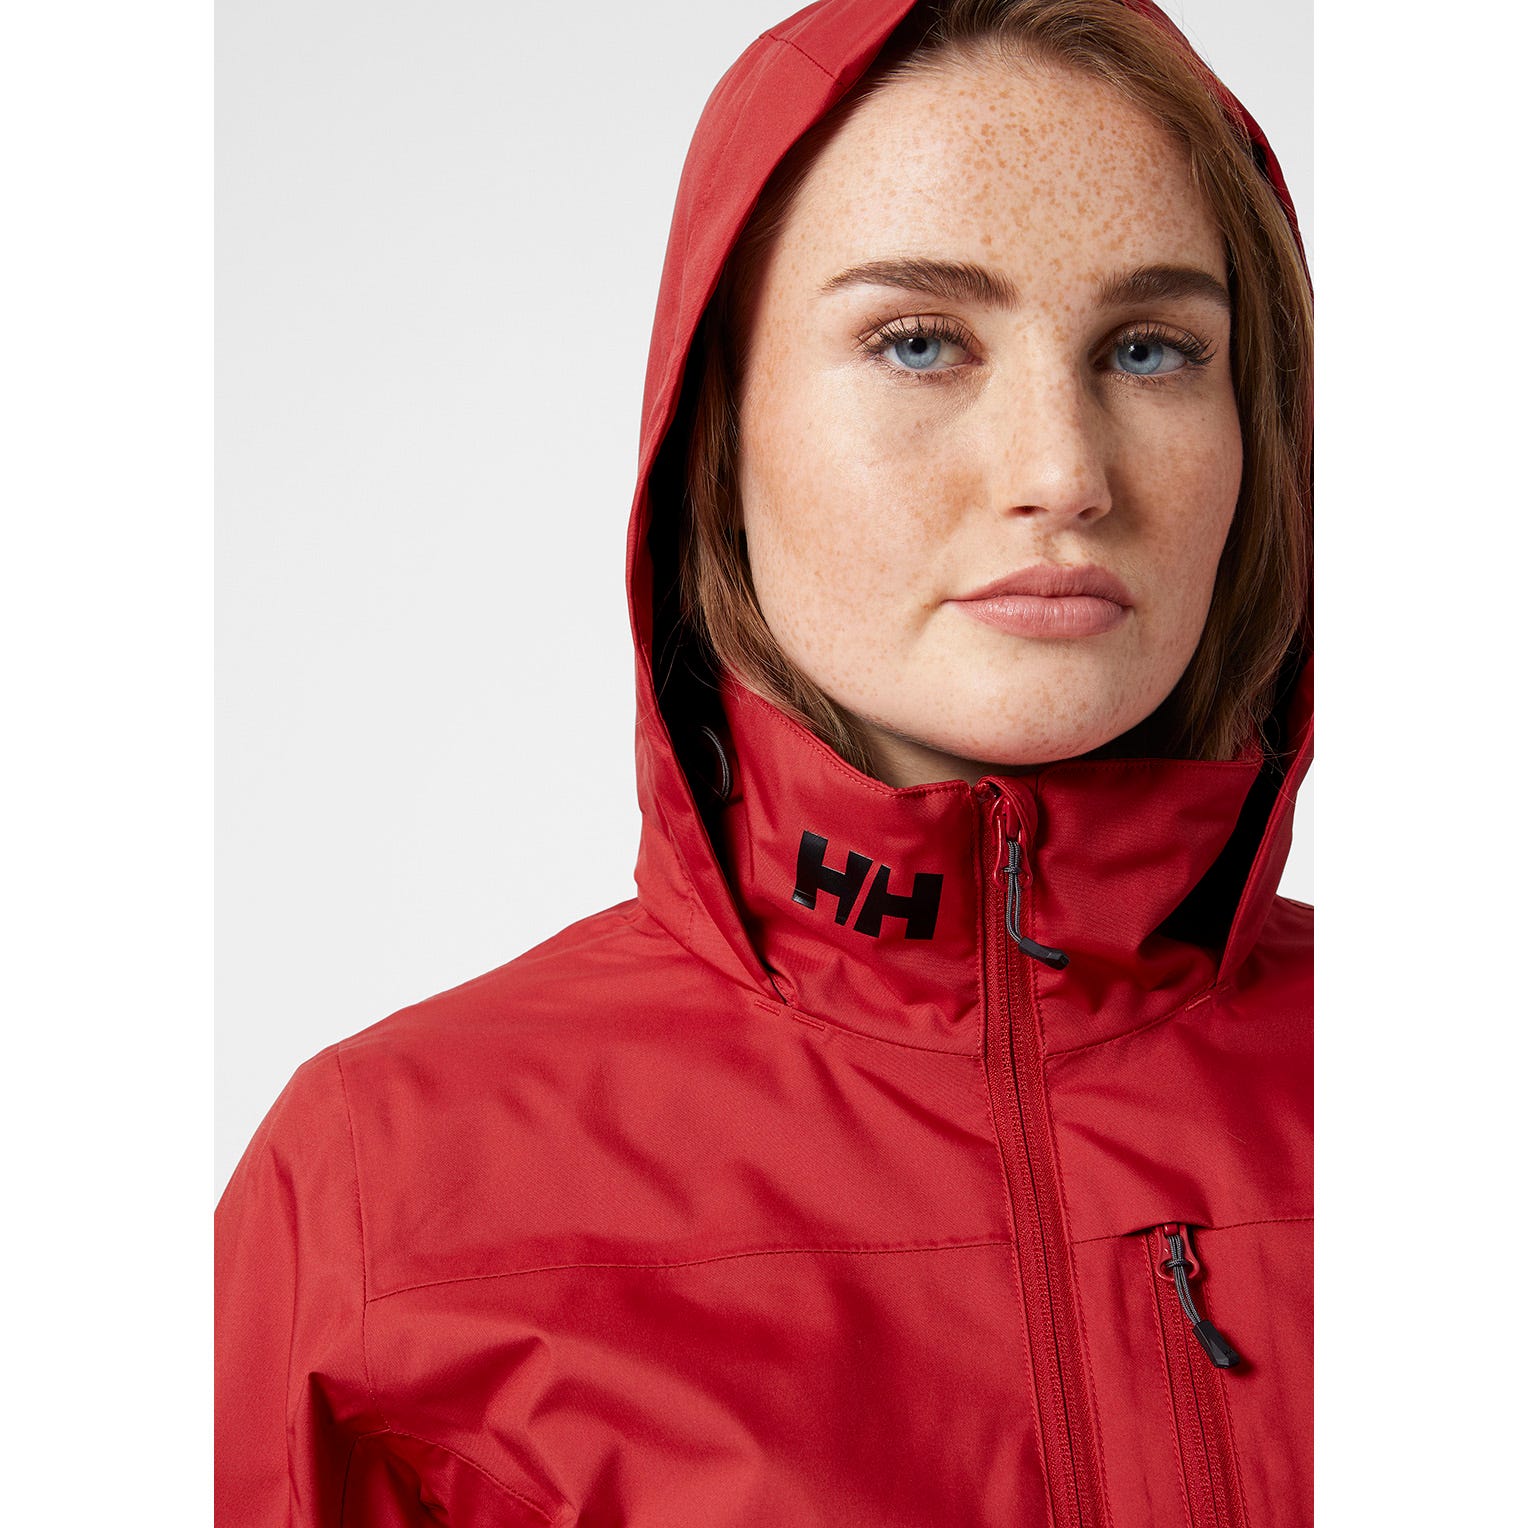 Giacca Donna Helly Hansen Crew Hooded Jacke